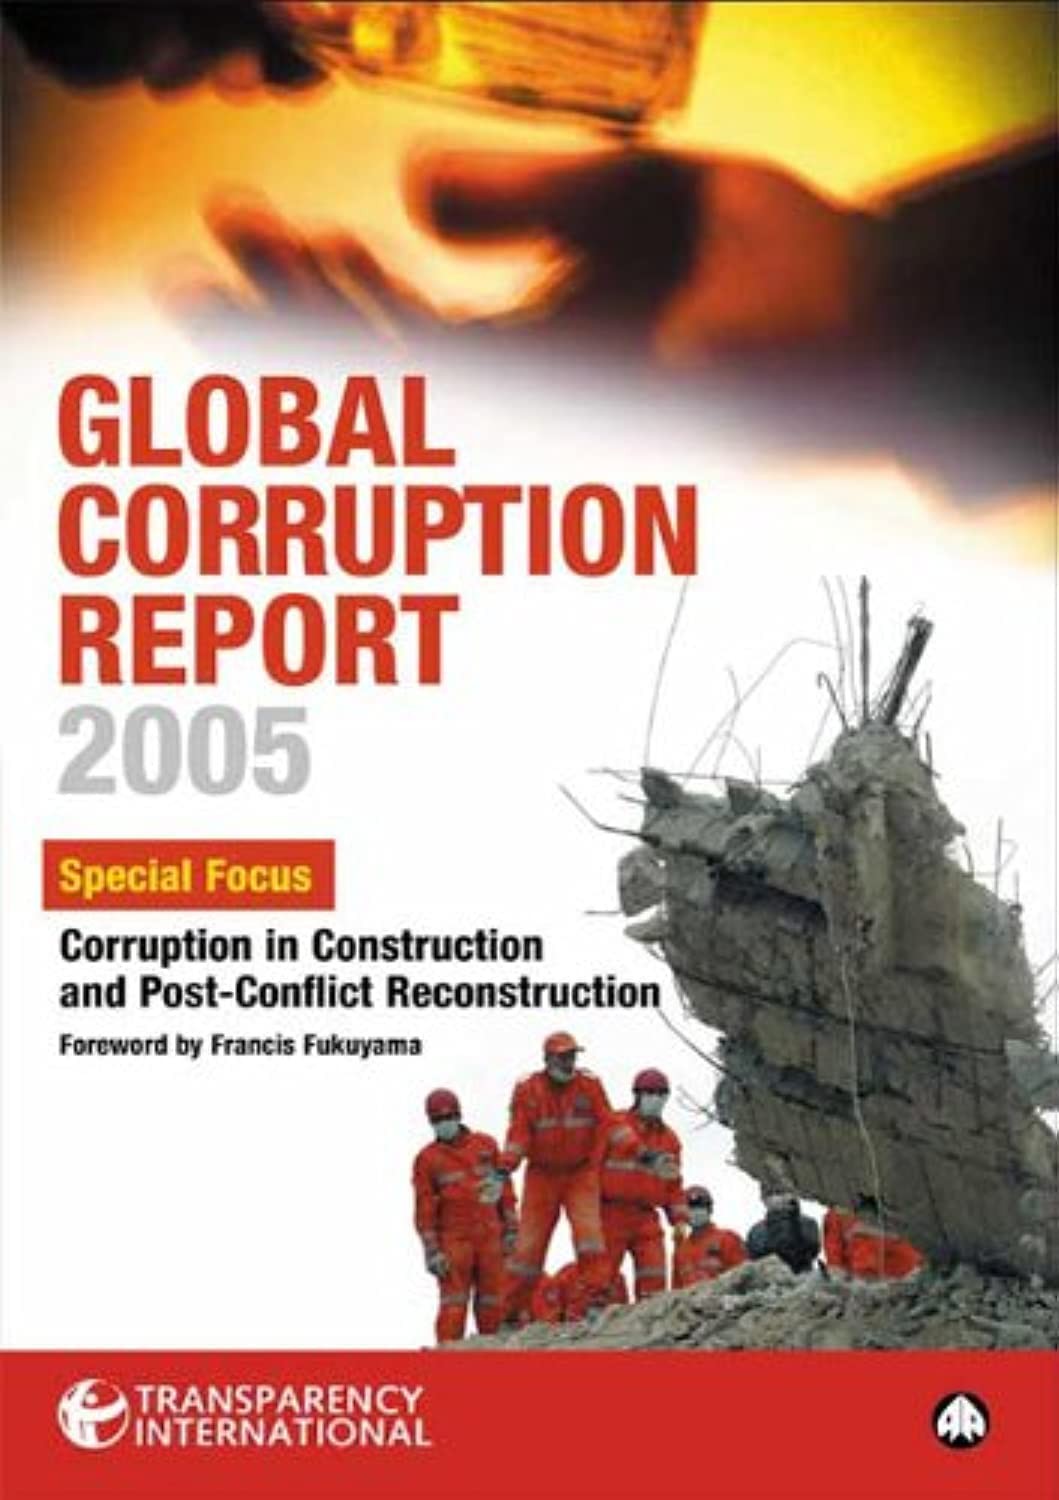 Global Corruption Report 2005: Special Focus: Corruption in Construction and Post